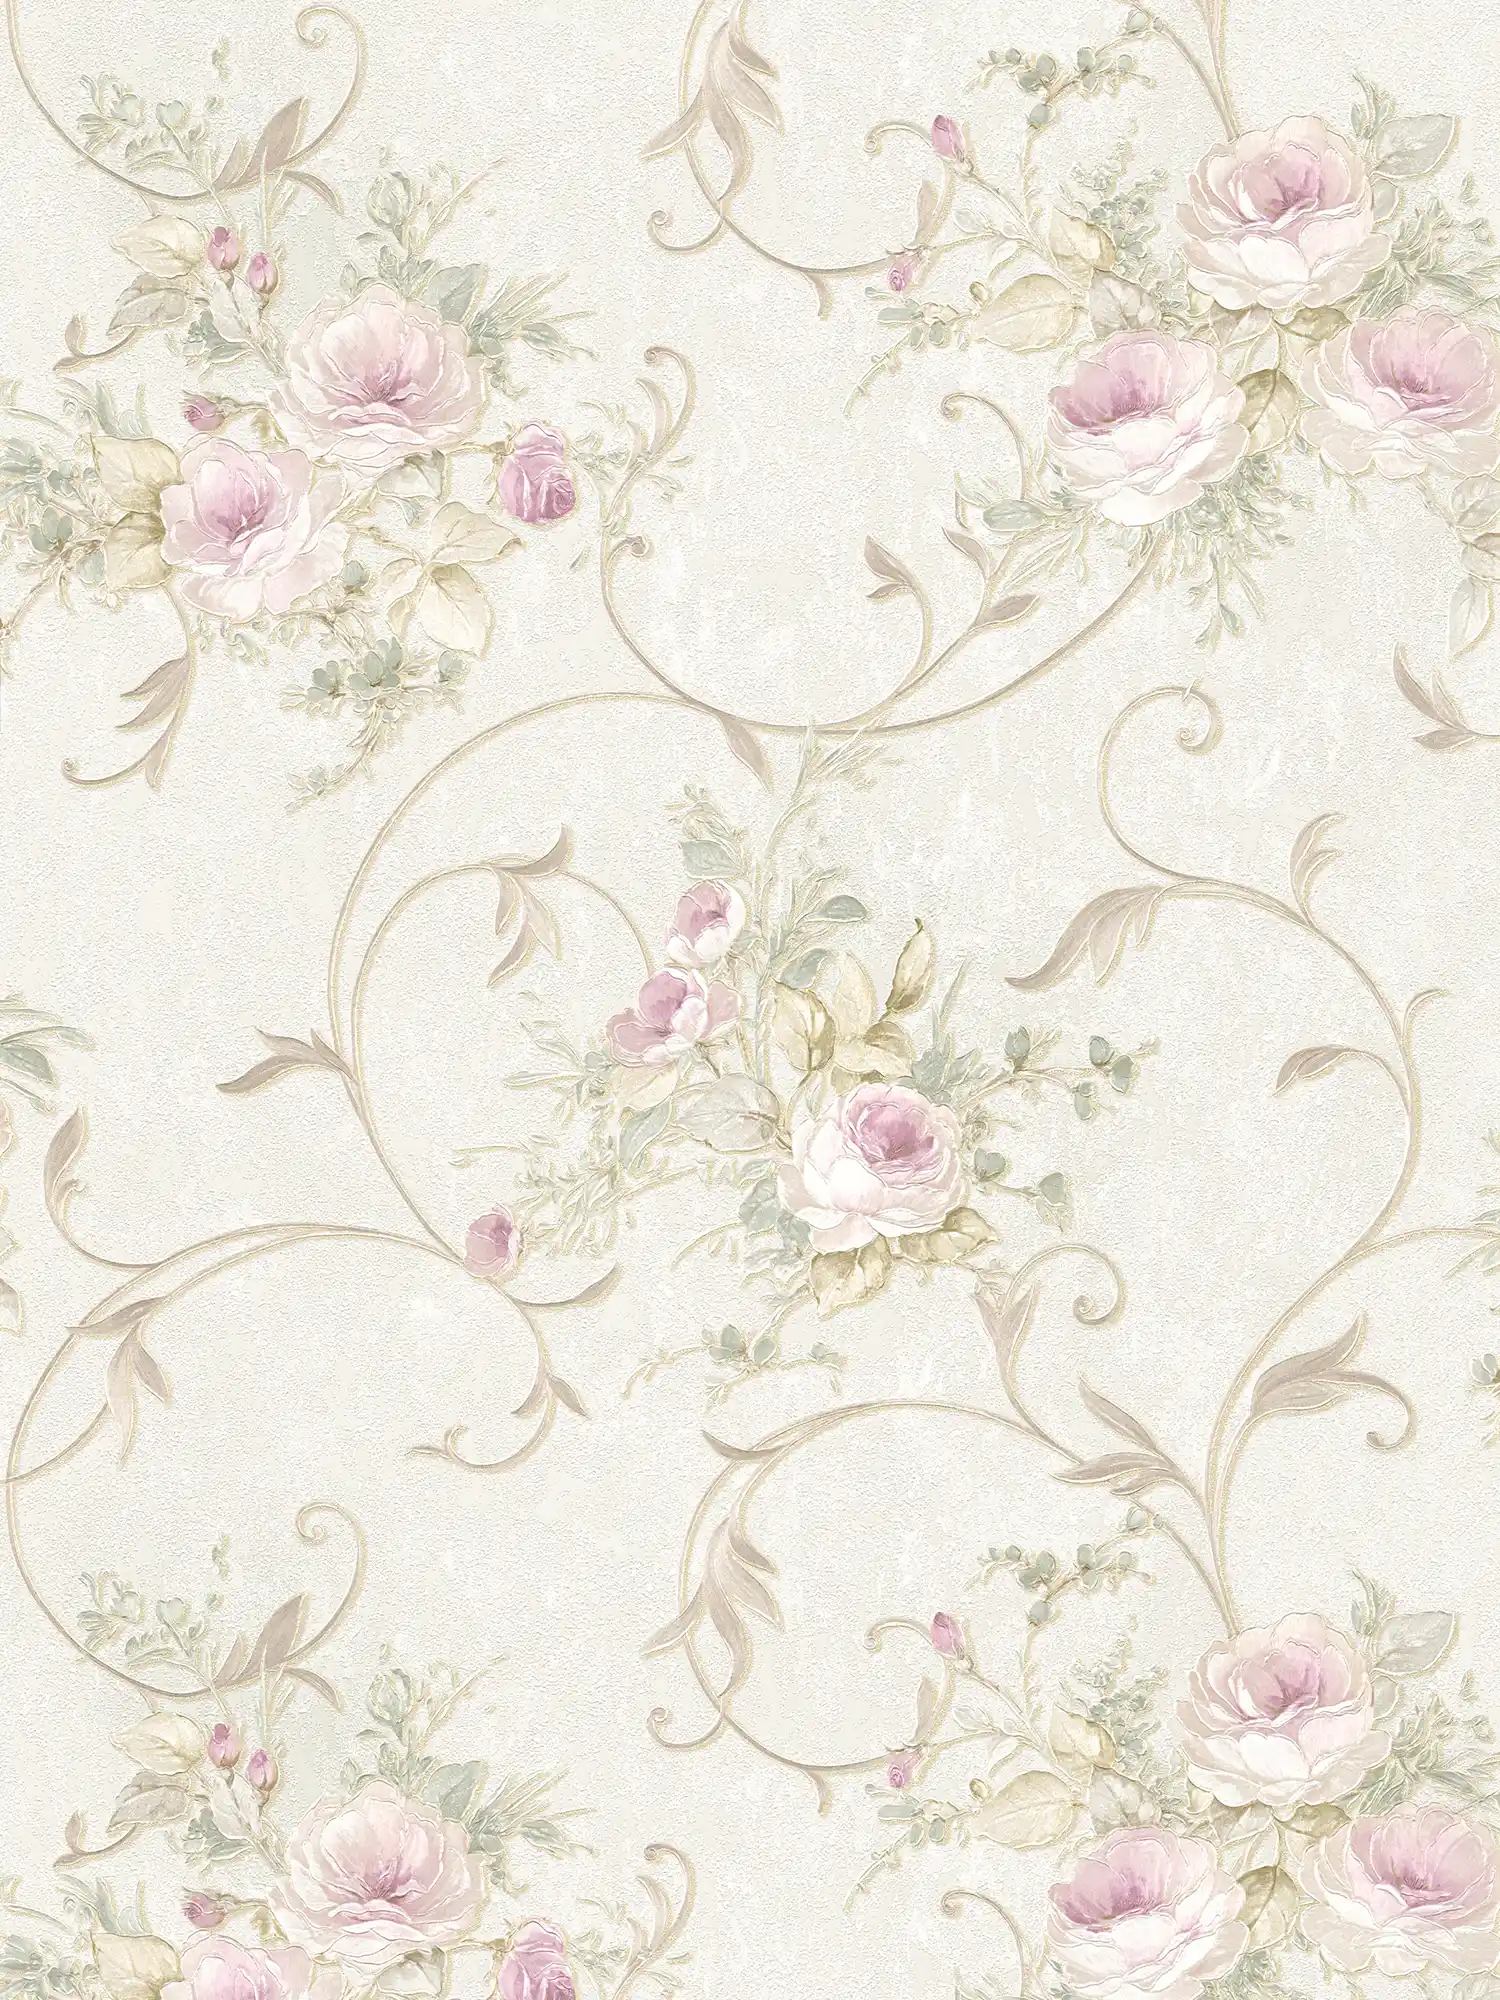 Rose wallpaper with metallic colours & tendril pattern - cream, green, pink
